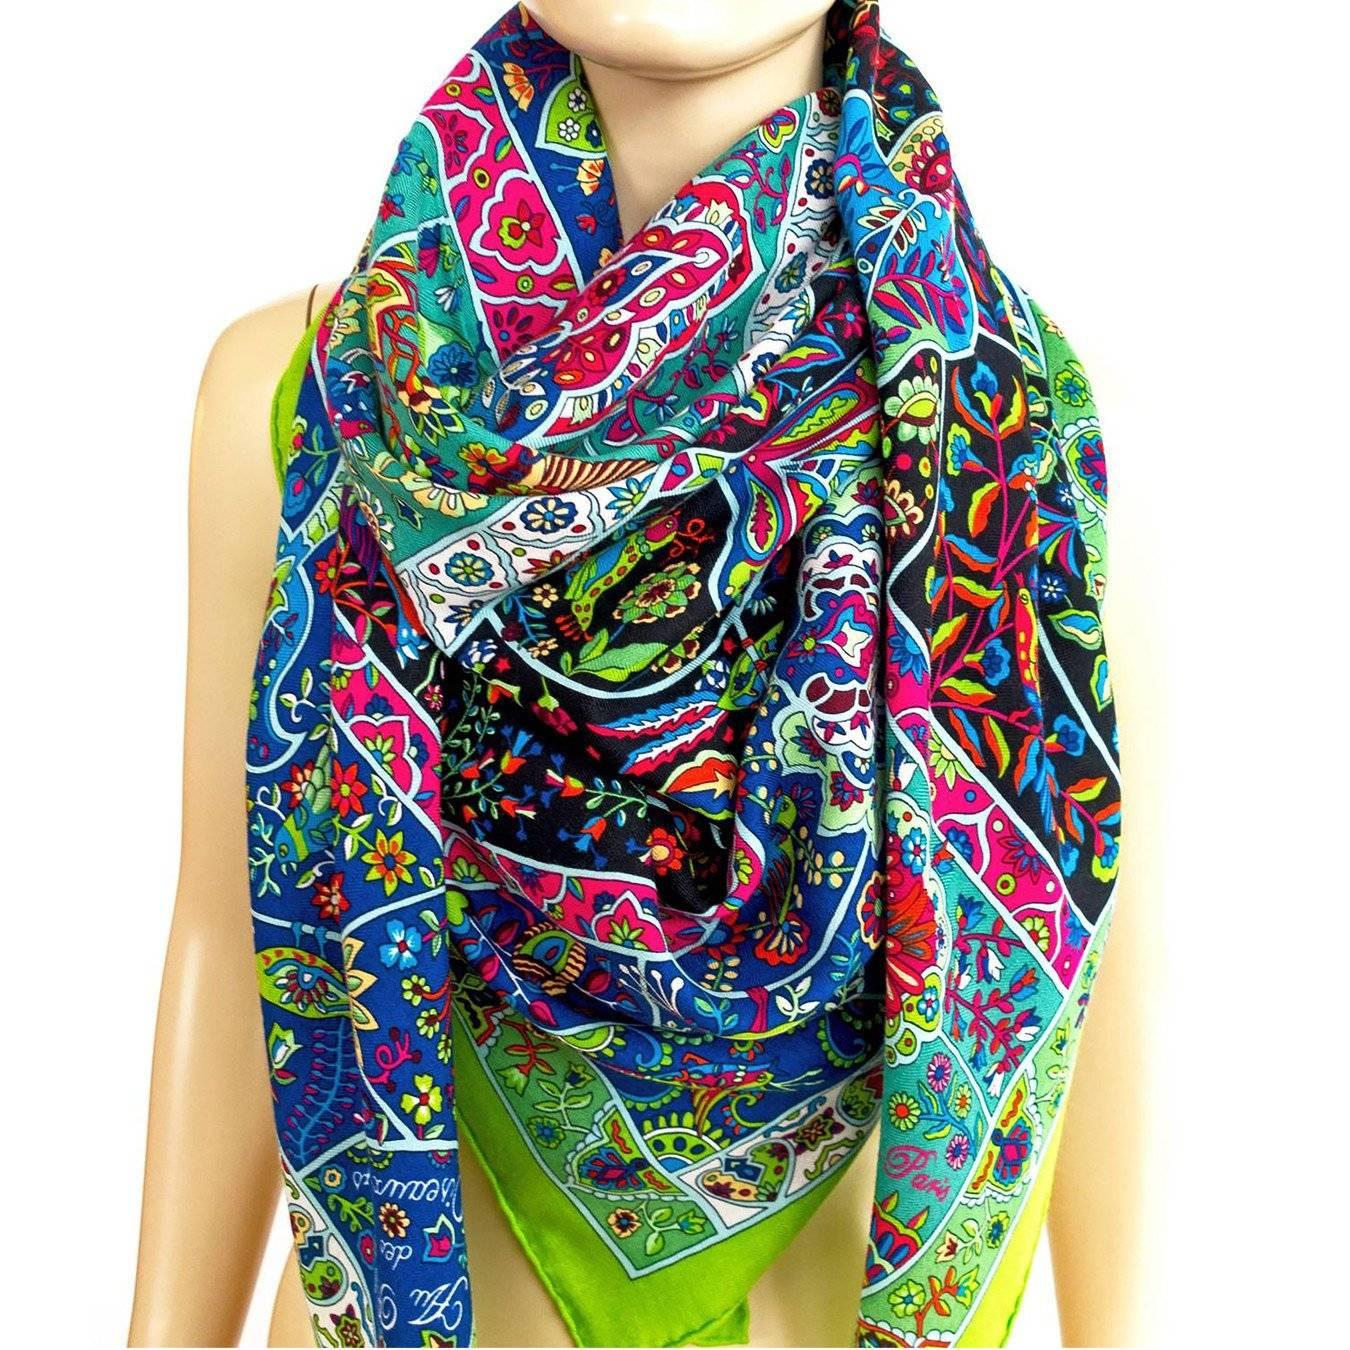 Hermes Au Pays des Oiseaux Fleurs Cashmere Silk Shawl GM Scarf Fluo Green
Brand New in Box. Never Worn. Pristine Condition.
Perfect gift! Comes store fresh with orange Hermes box.
Designed by Christine Henry, this giant Au Pays des Oiseaux Fleurs